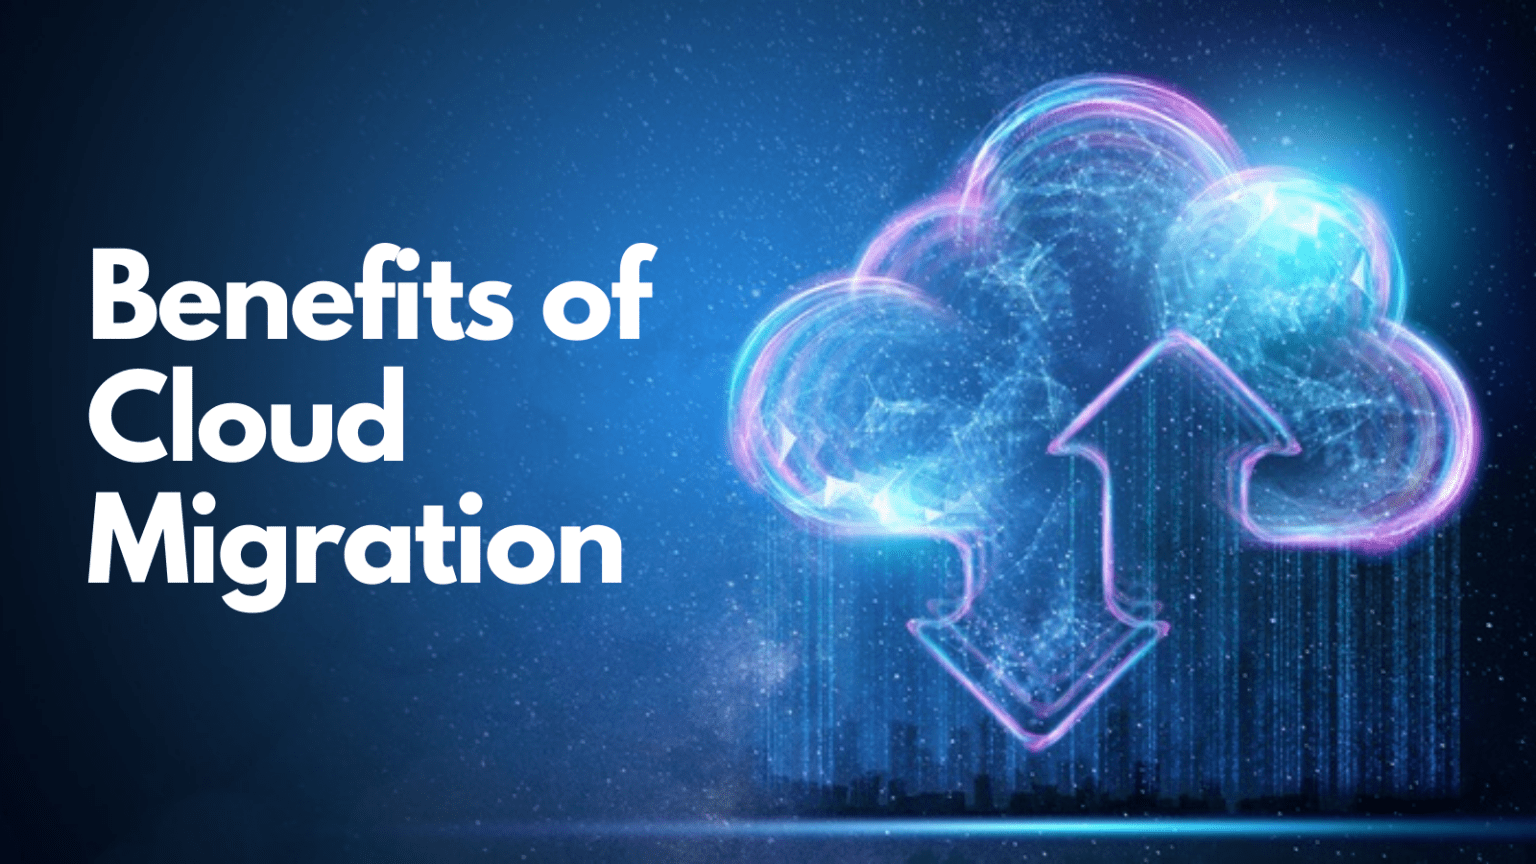 Why Cloud Migration? 9 Benefits of Migrating your Business to the Cloud